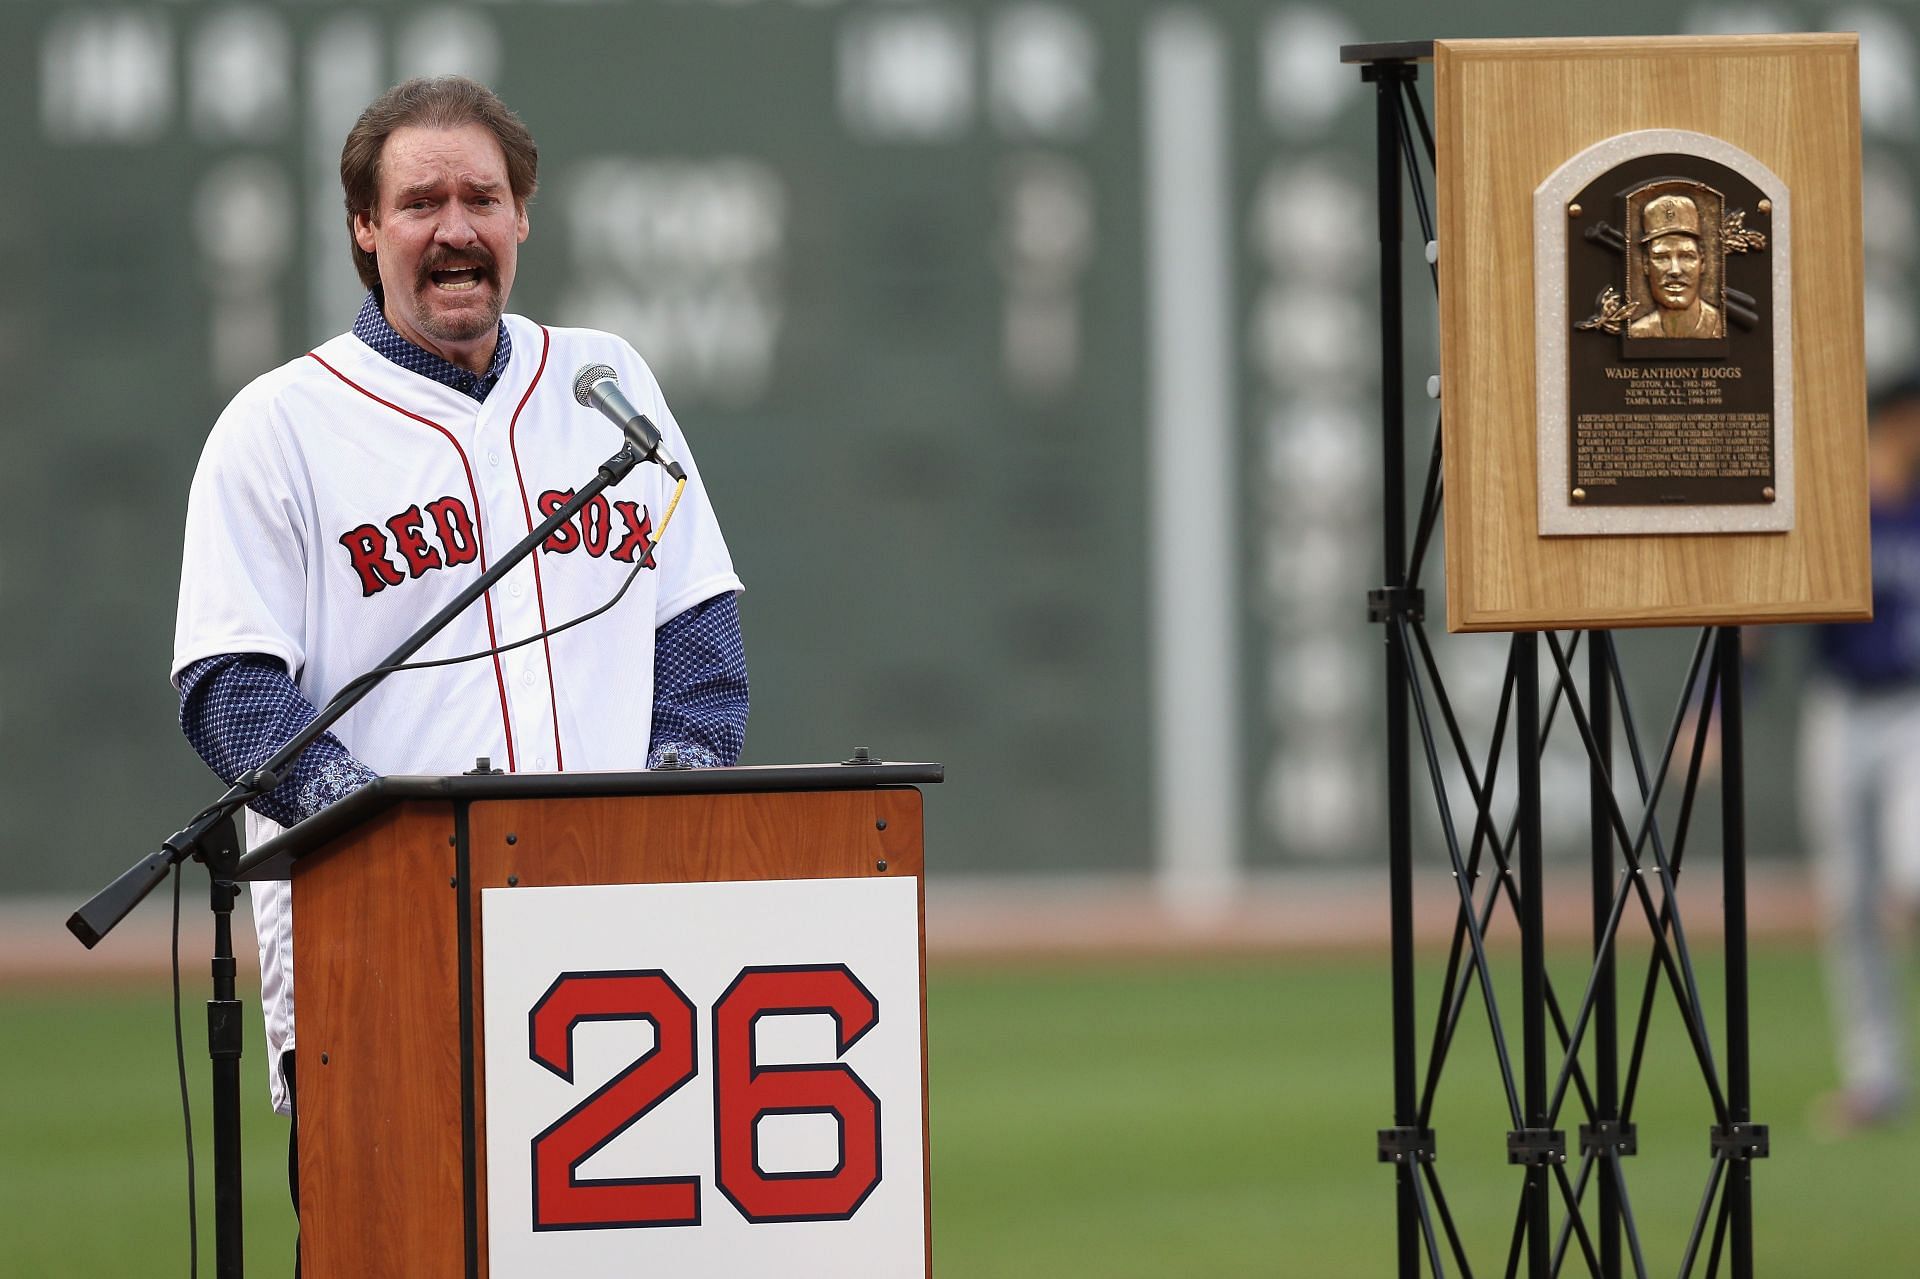 Red Sox on X: #TBT to Wade Boggs' 1986 season when he earned his